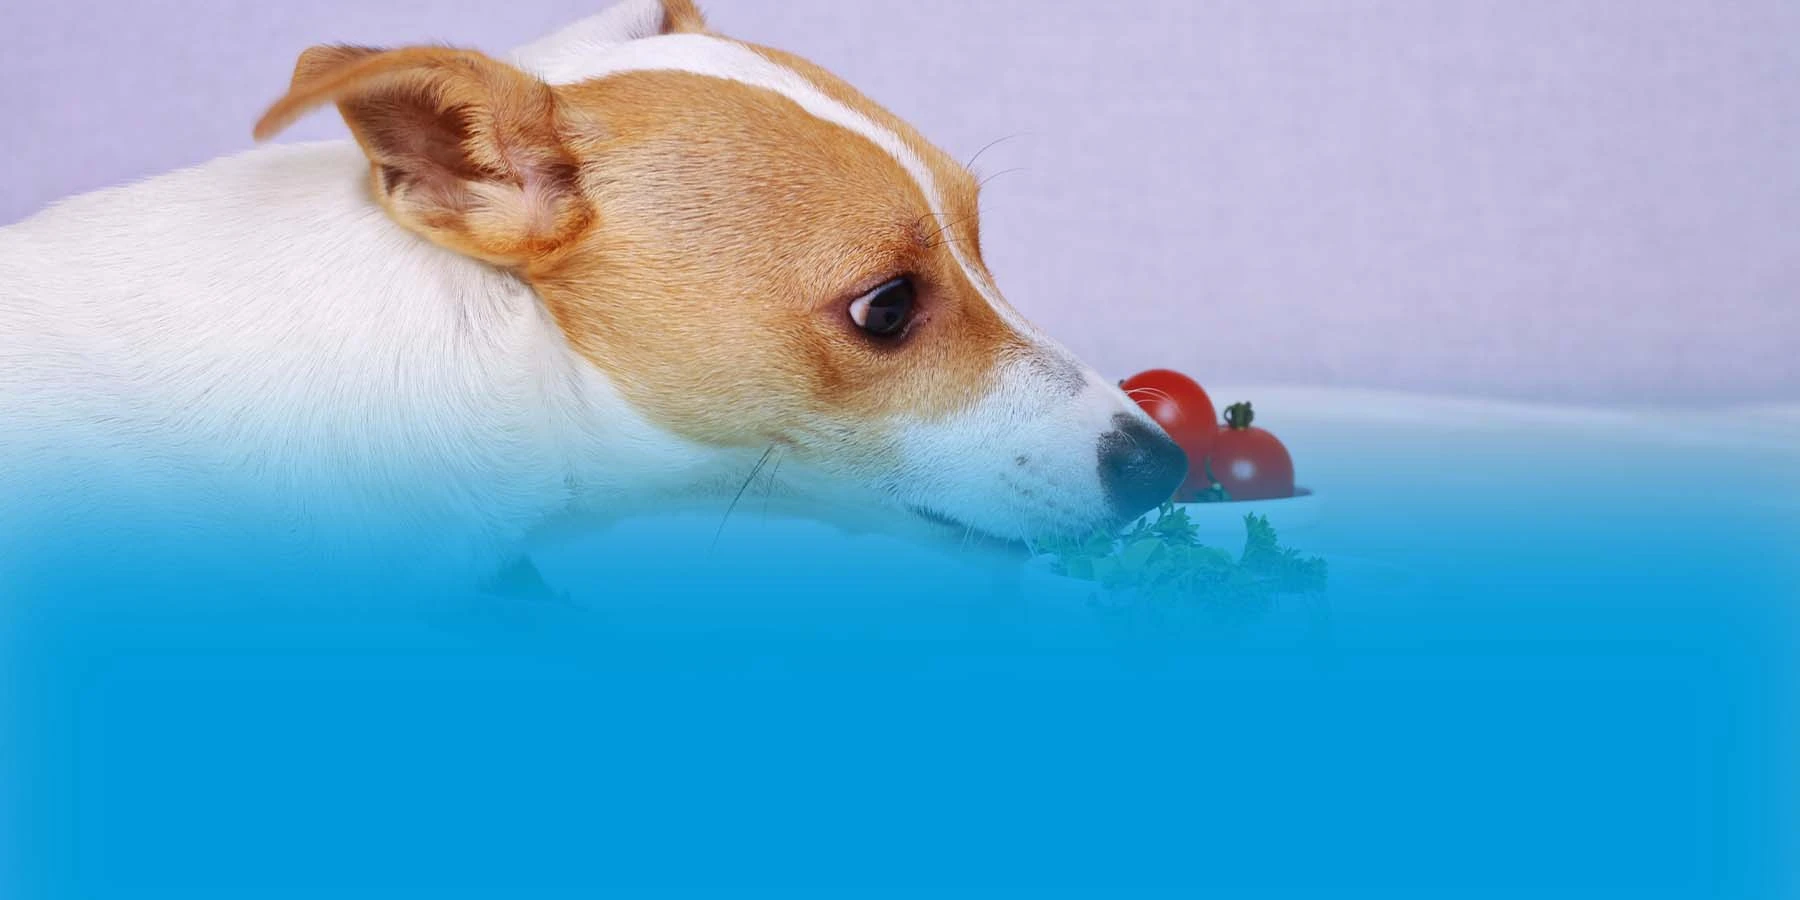 A Jack Russell terrier eating salad.